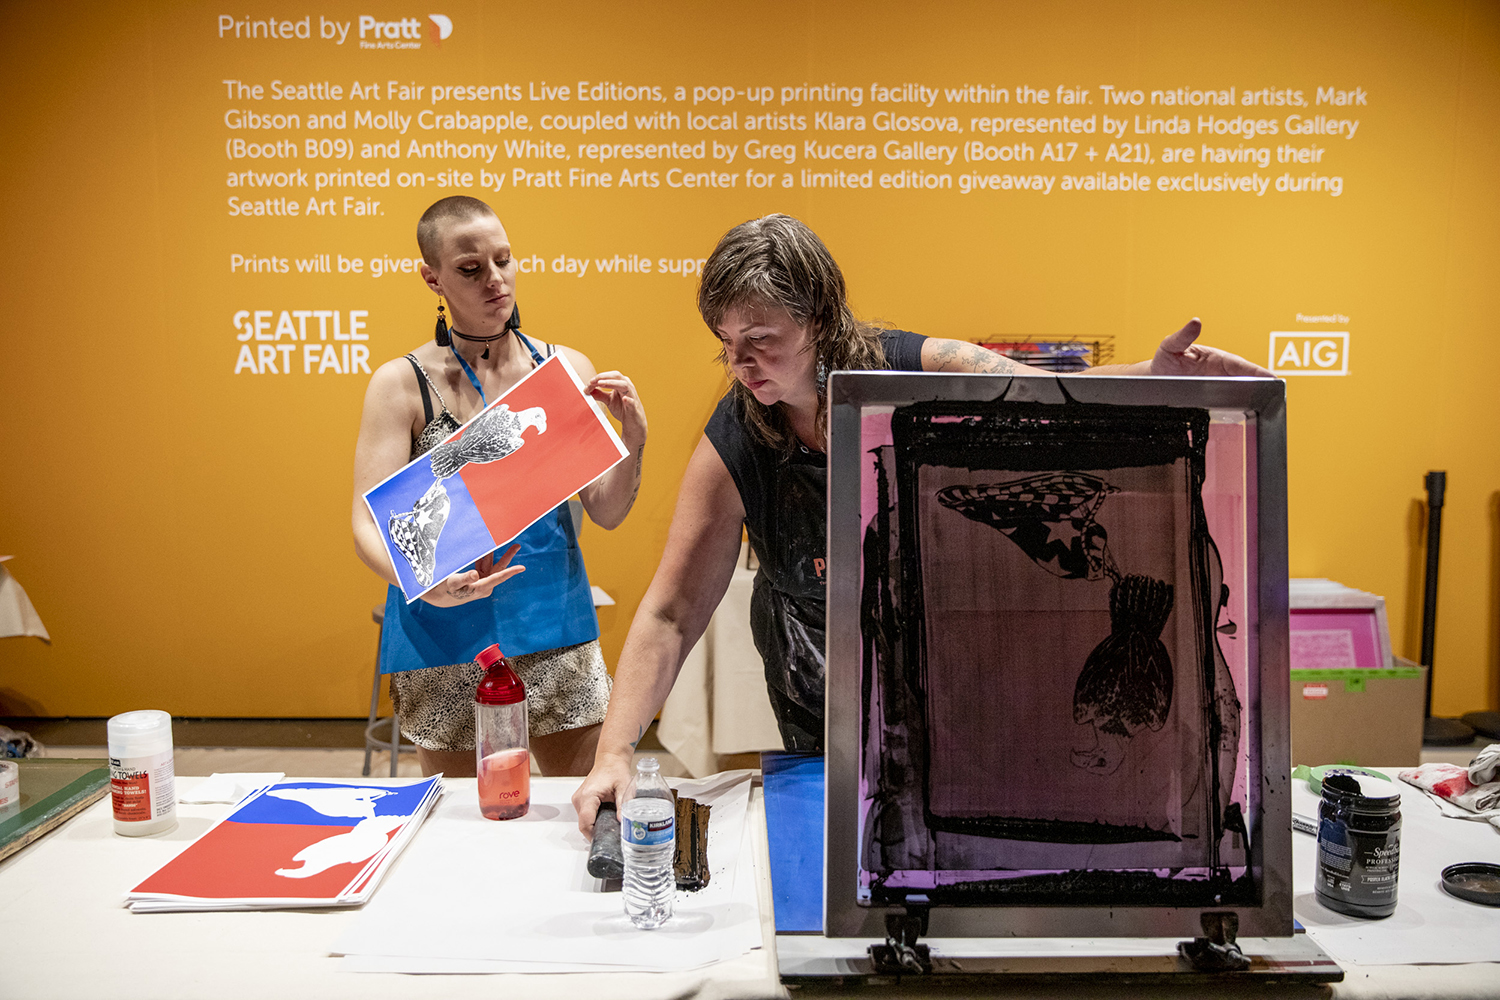 Screen printing by Molly Crabapple during the Seattle Art Fair at CenturyLink Field Event Center on Aug. 1, 2019.